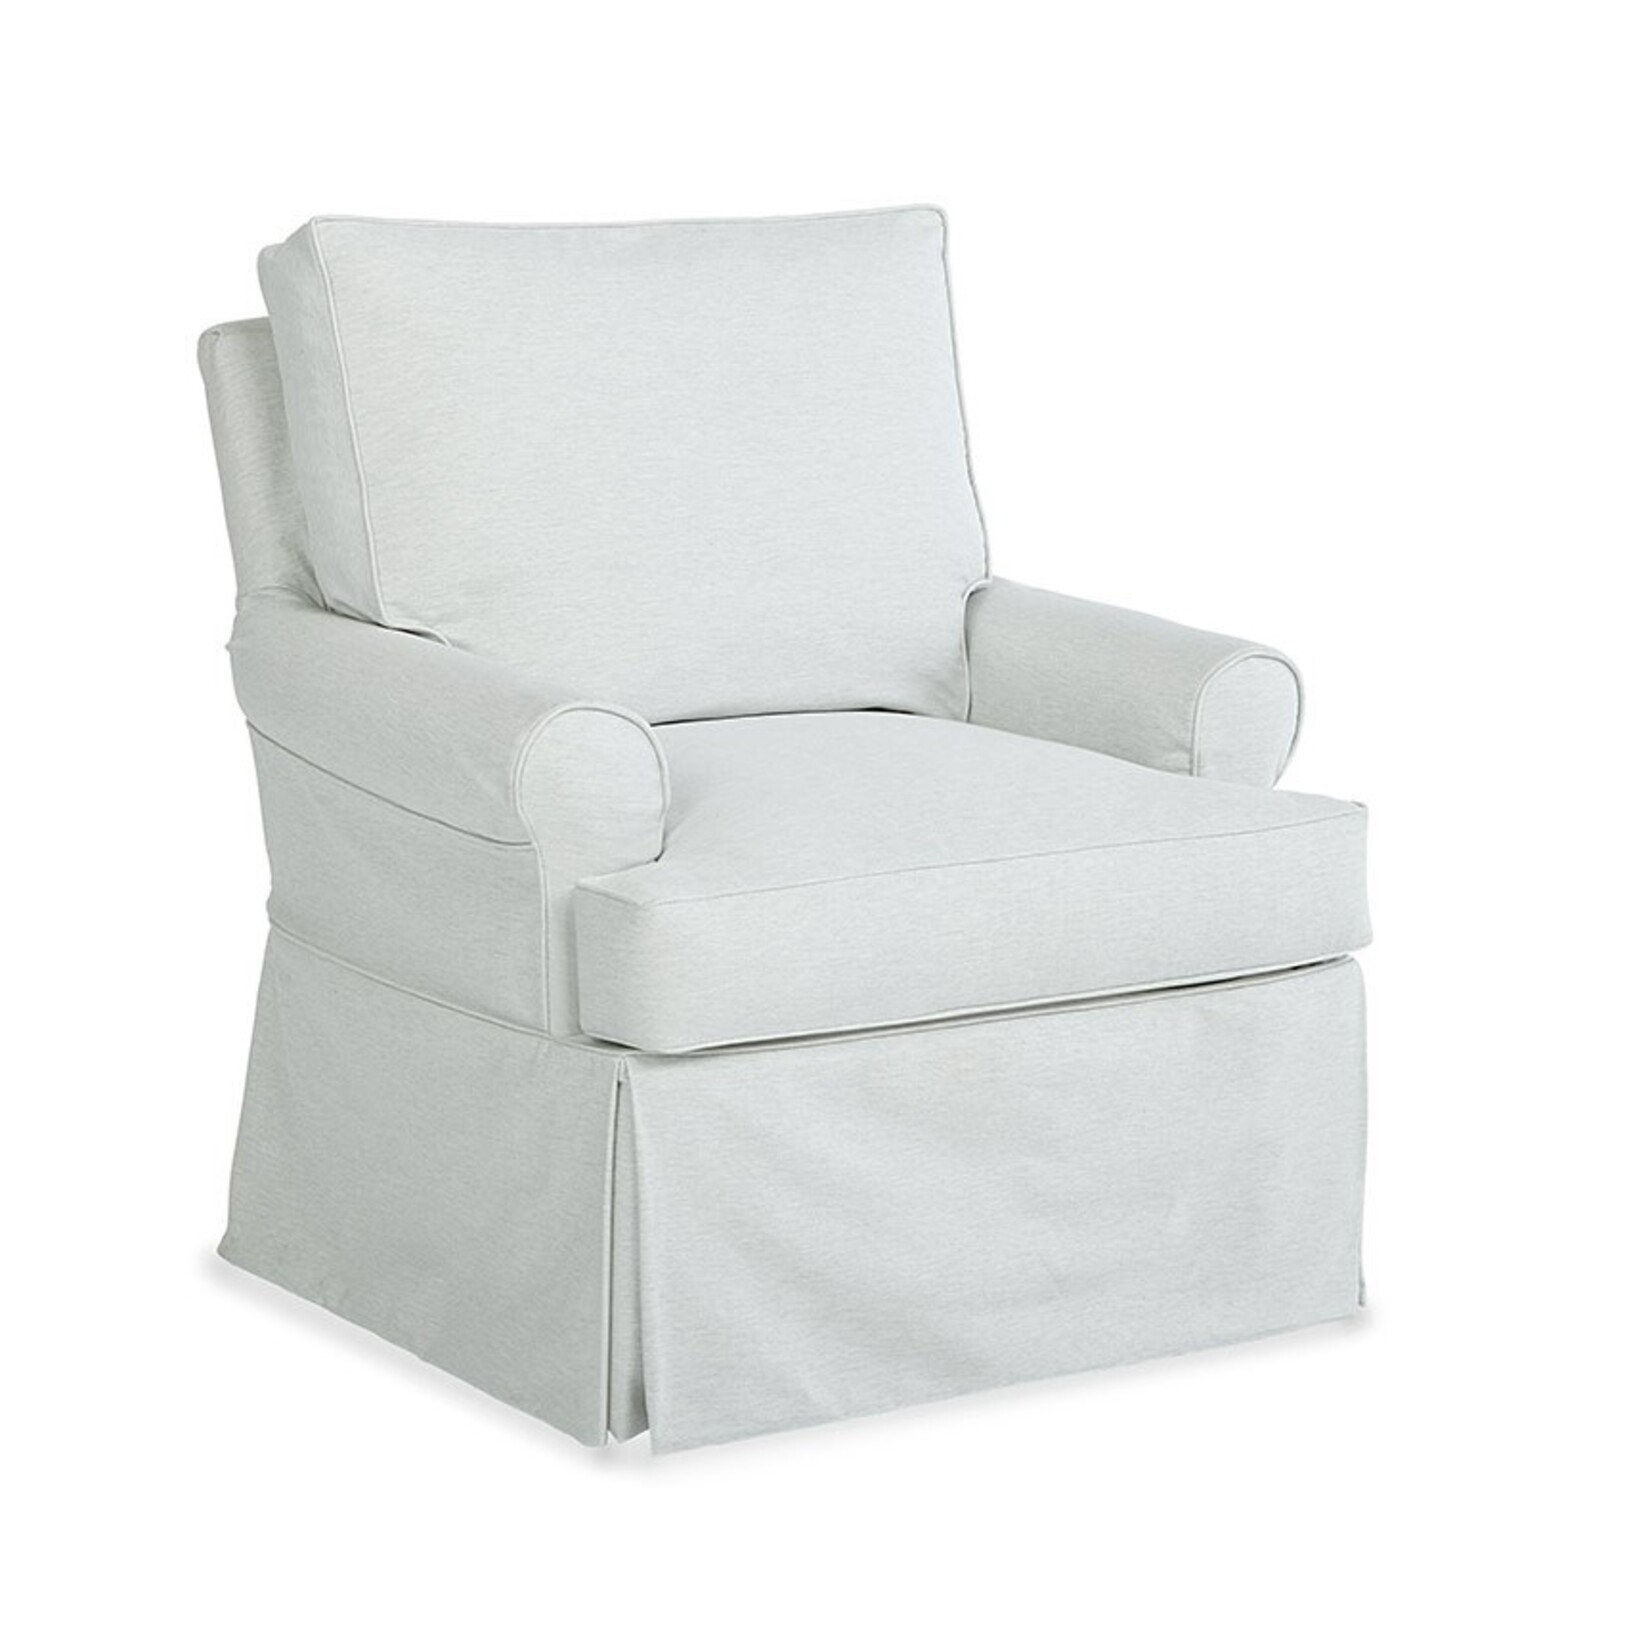 Lucy Slipcovered Swivel Chair - Blanton Tranquil